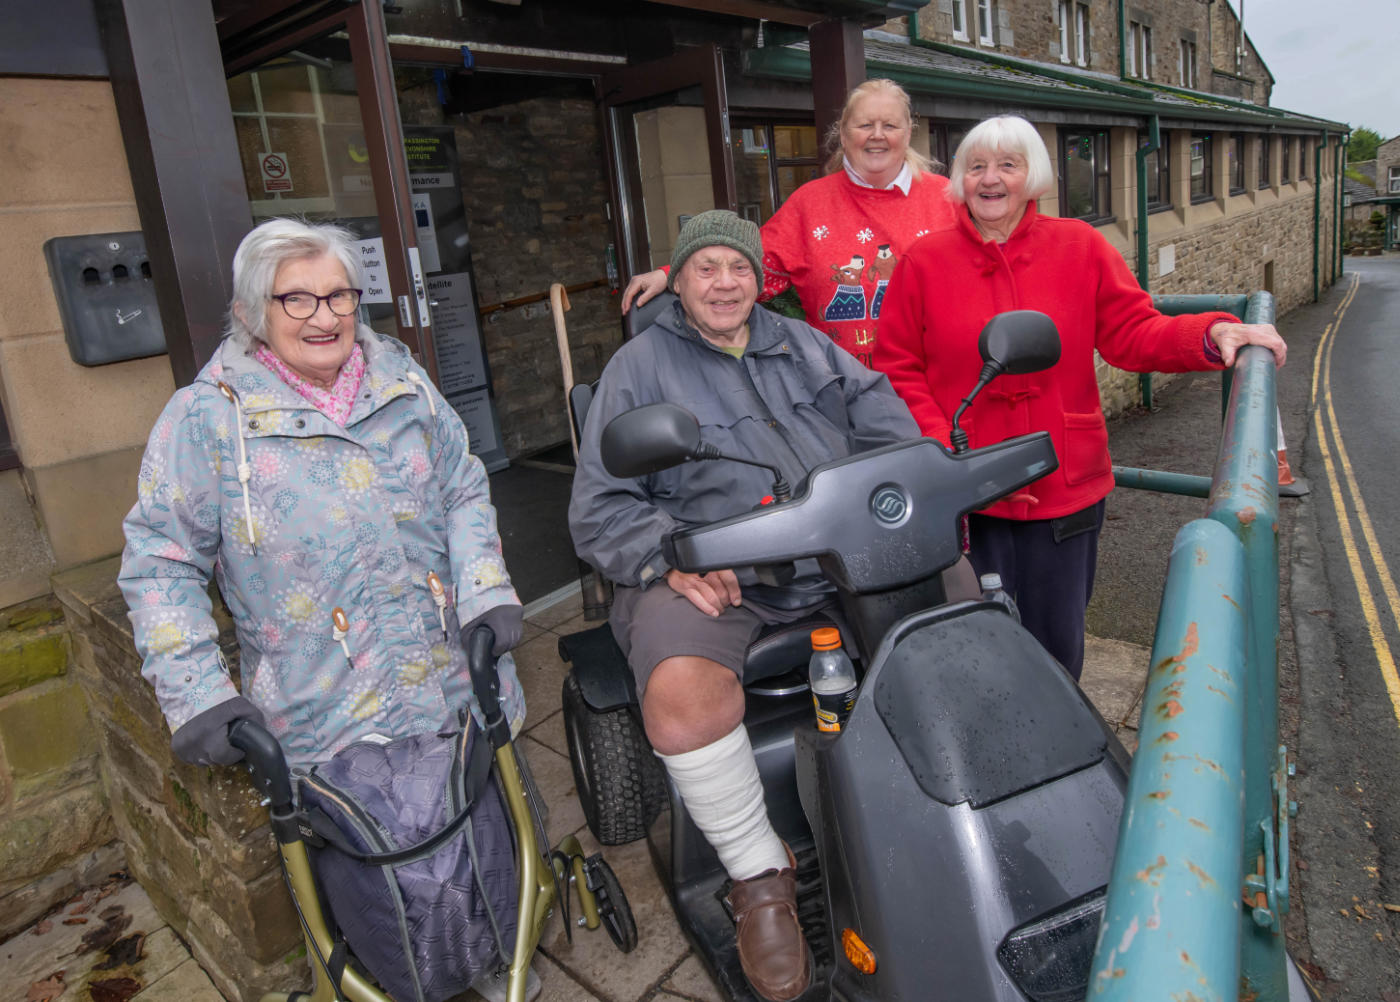 Rose Mary Baxter, Burke Smith, Hazel Drew and Jean Rowley outside the new accessible doors at Grassington Town Hall